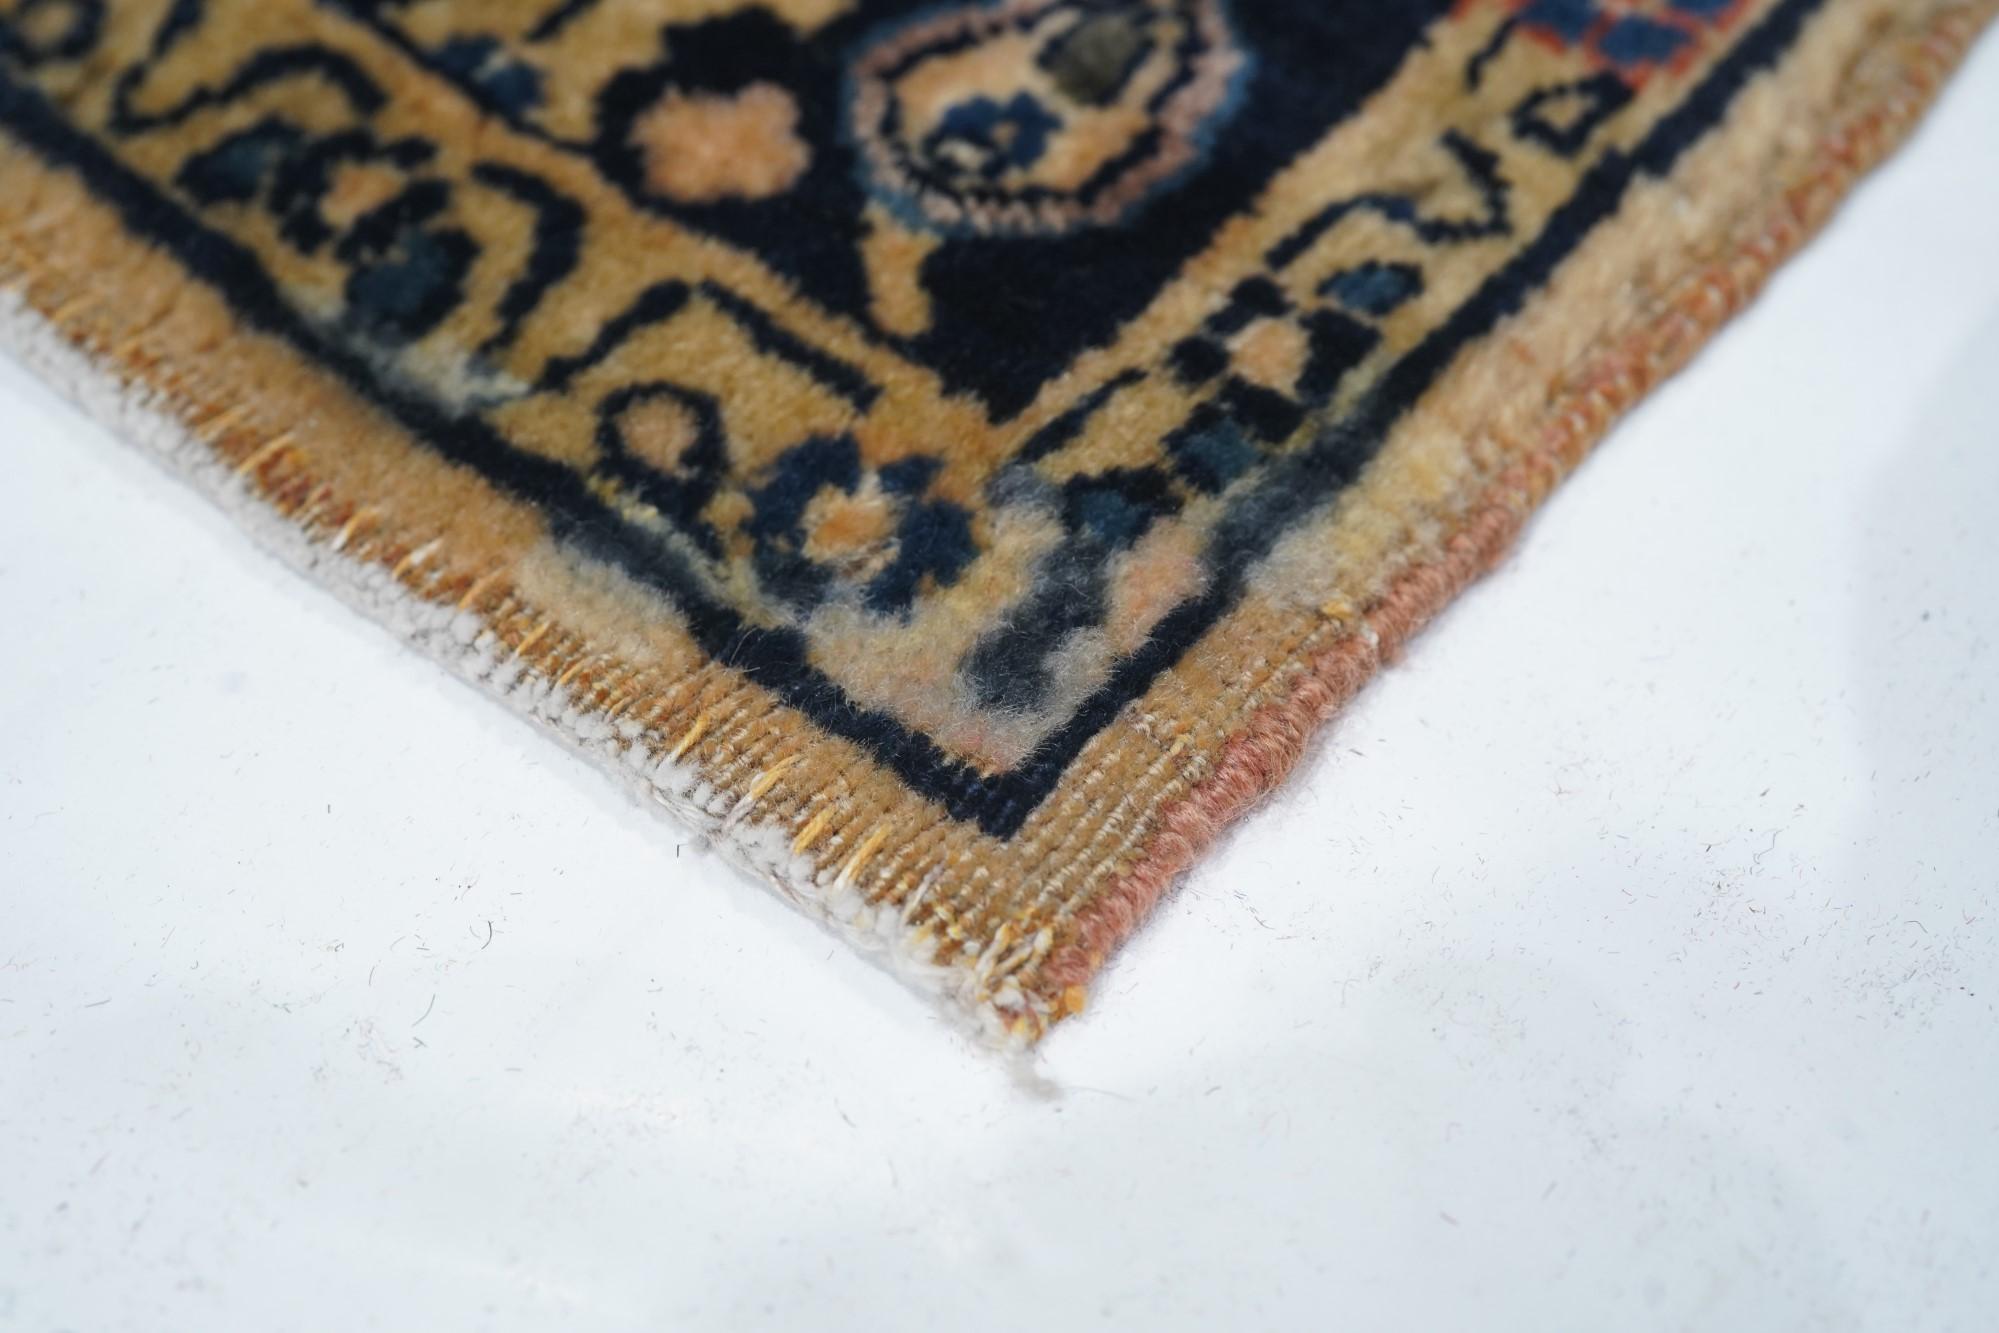 Antique Sarouk rug, measures :3'5'' x 5'. This relatively well-woven West Persian scatter shows a subtly variegated sandy straw field with a stepped, open cartouche medallion with a blue rosette centre and flanking floral trails. Field coverage of